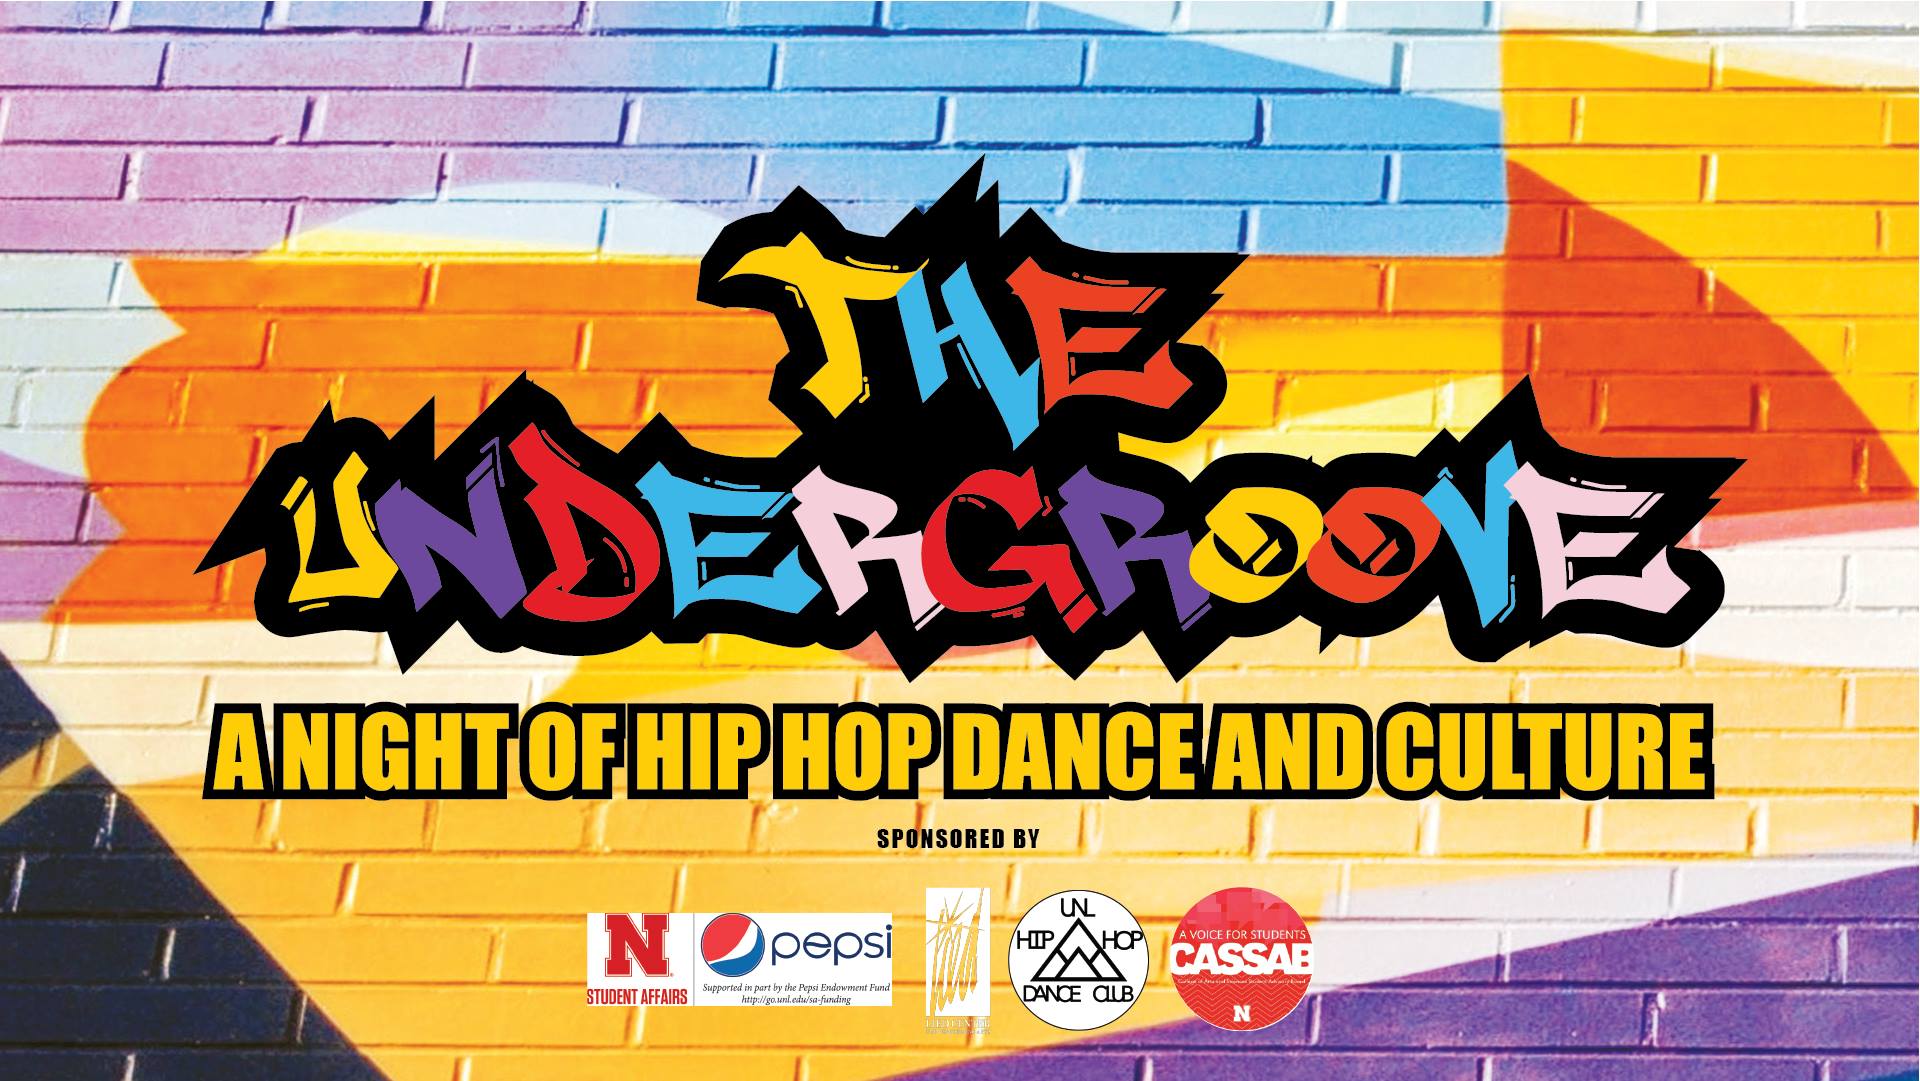 This event is organized by the Hip Hop Dance Club.